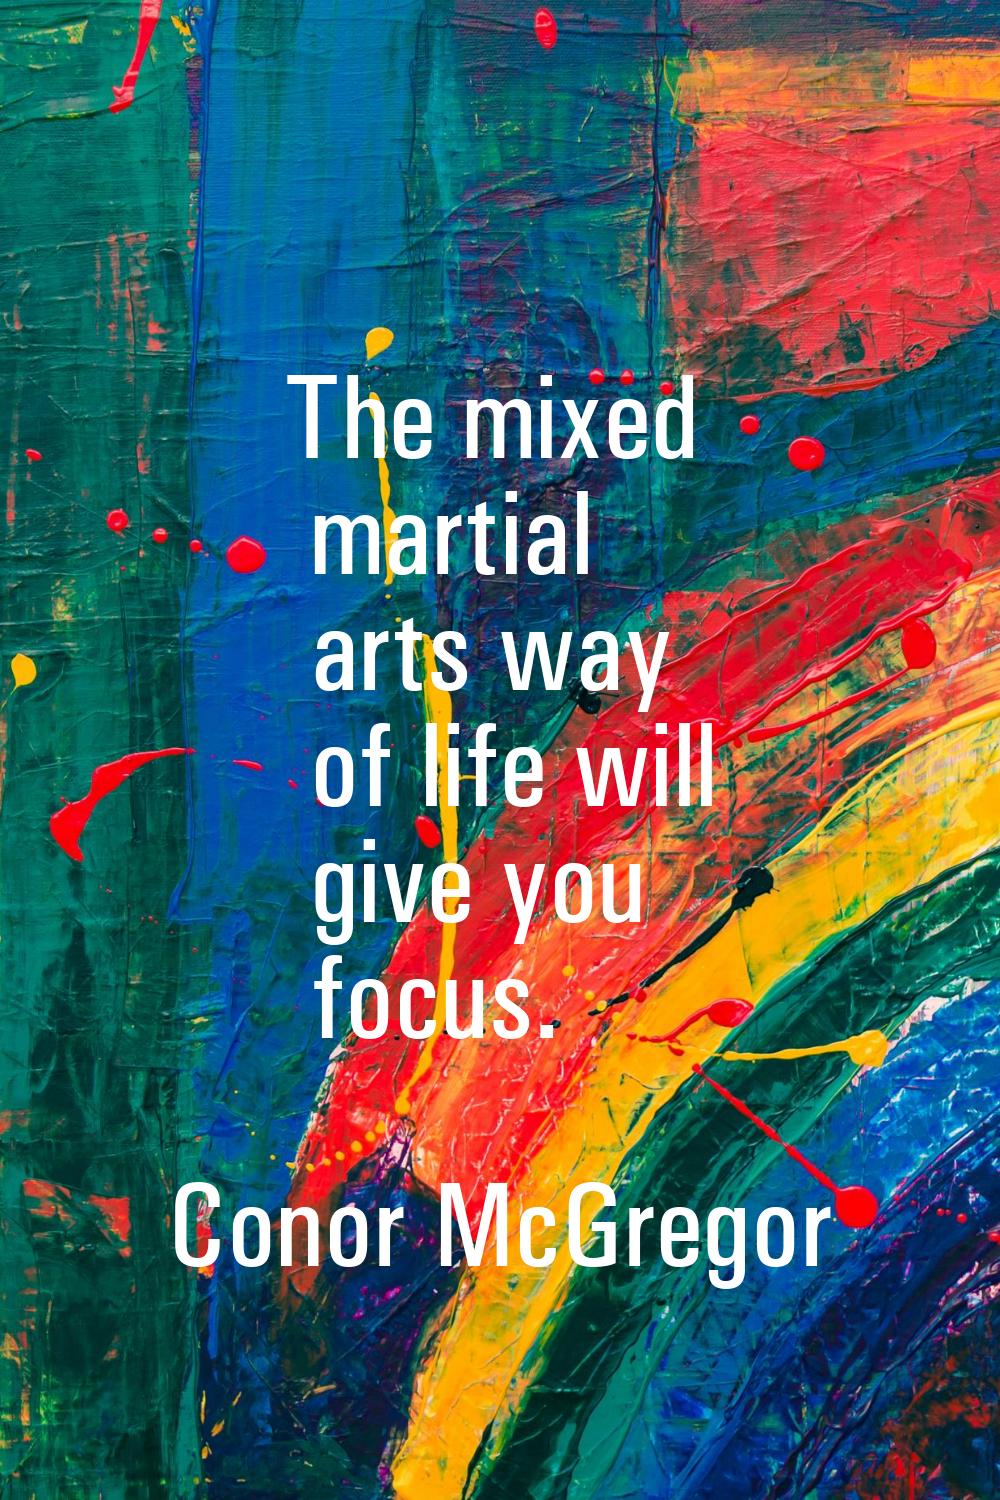 The mixed martial arts way of life will give you focus.